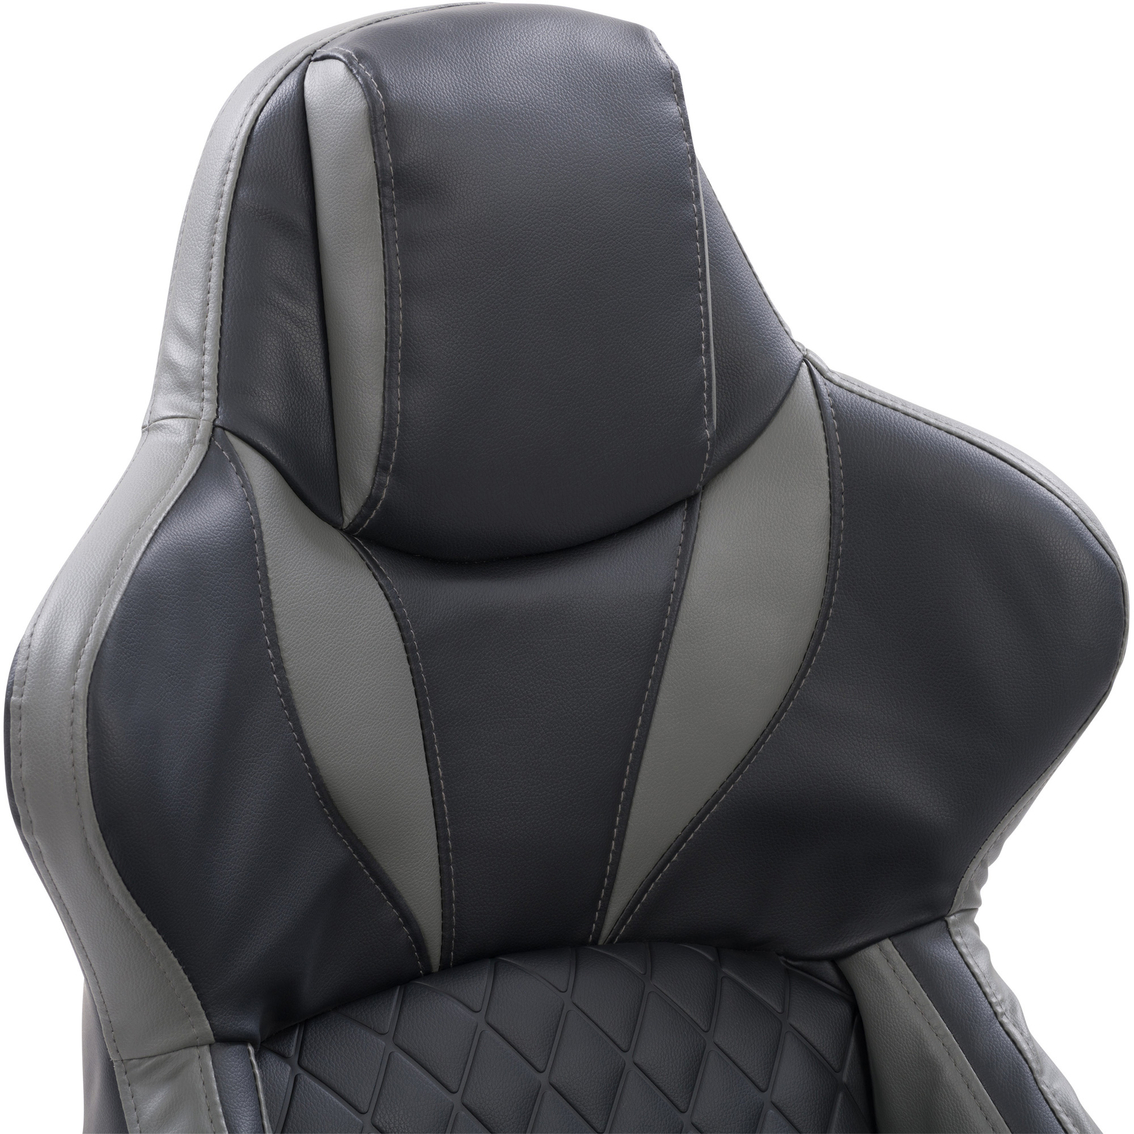 CorLiving Nightshade Gaming Chair - Image 4 of 8